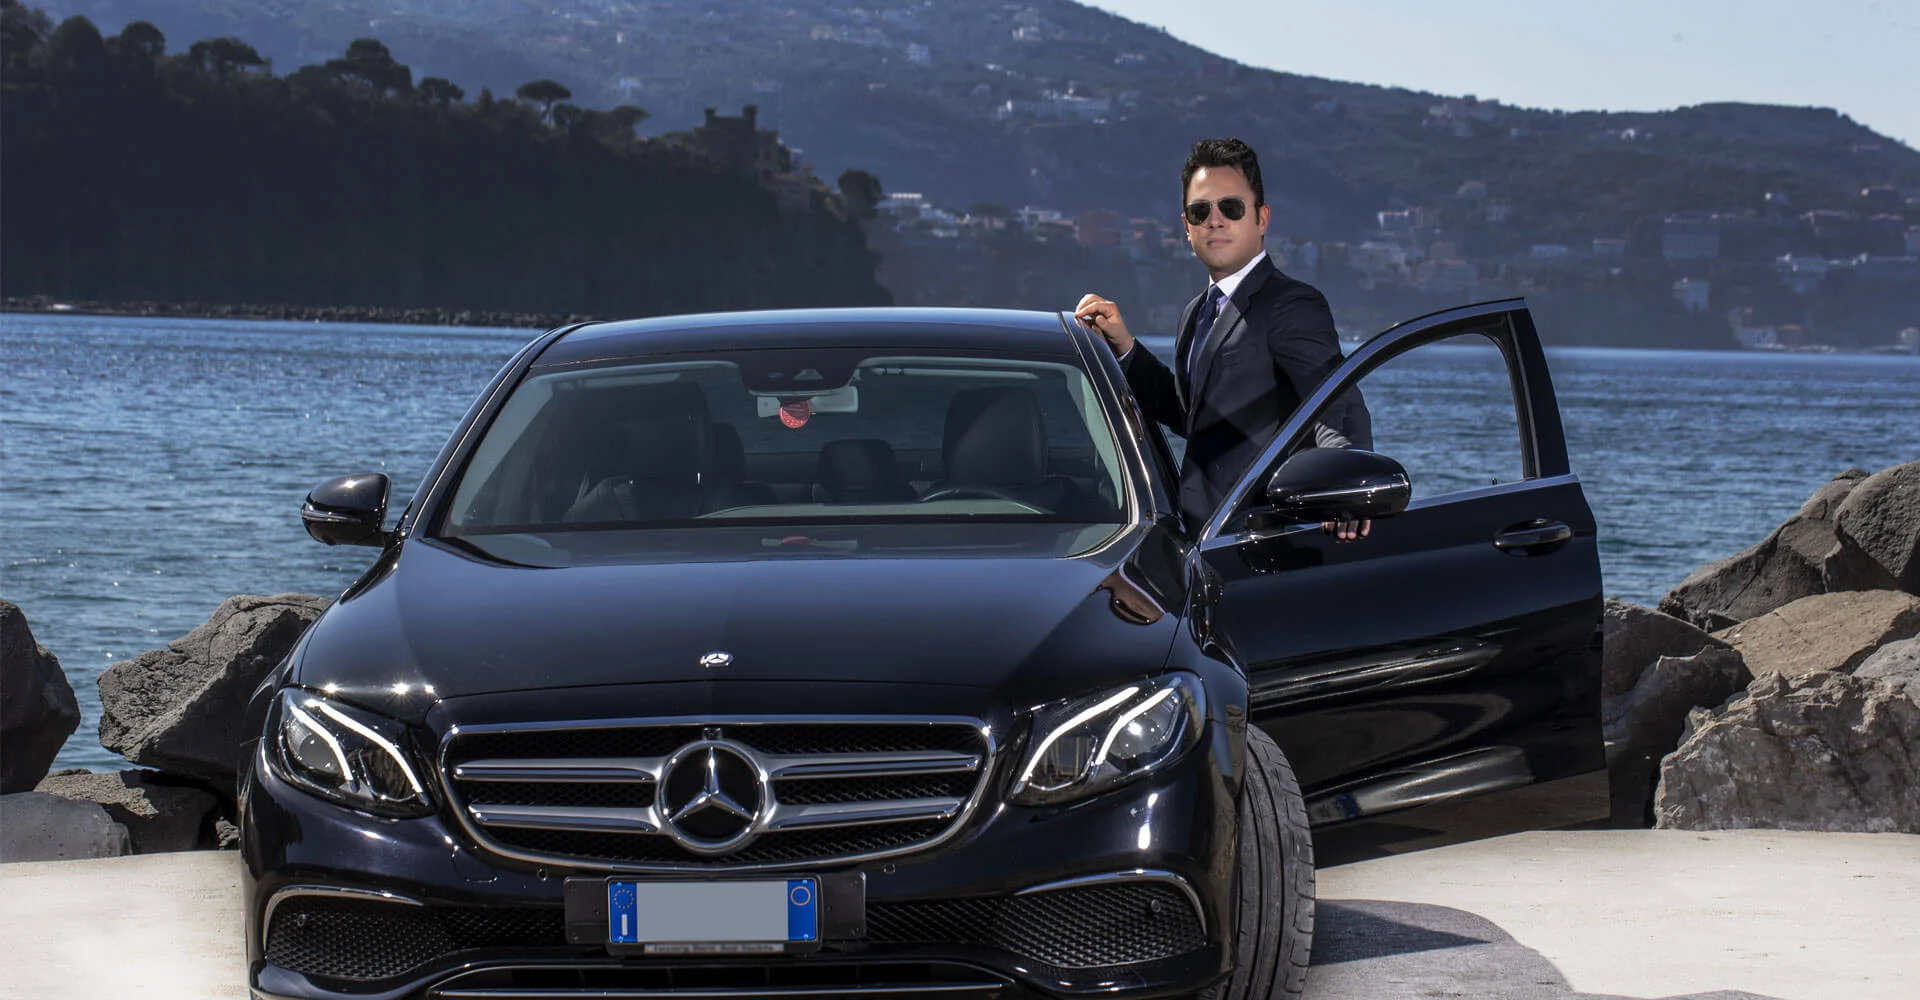 Reserve your Chauffeured car rental service